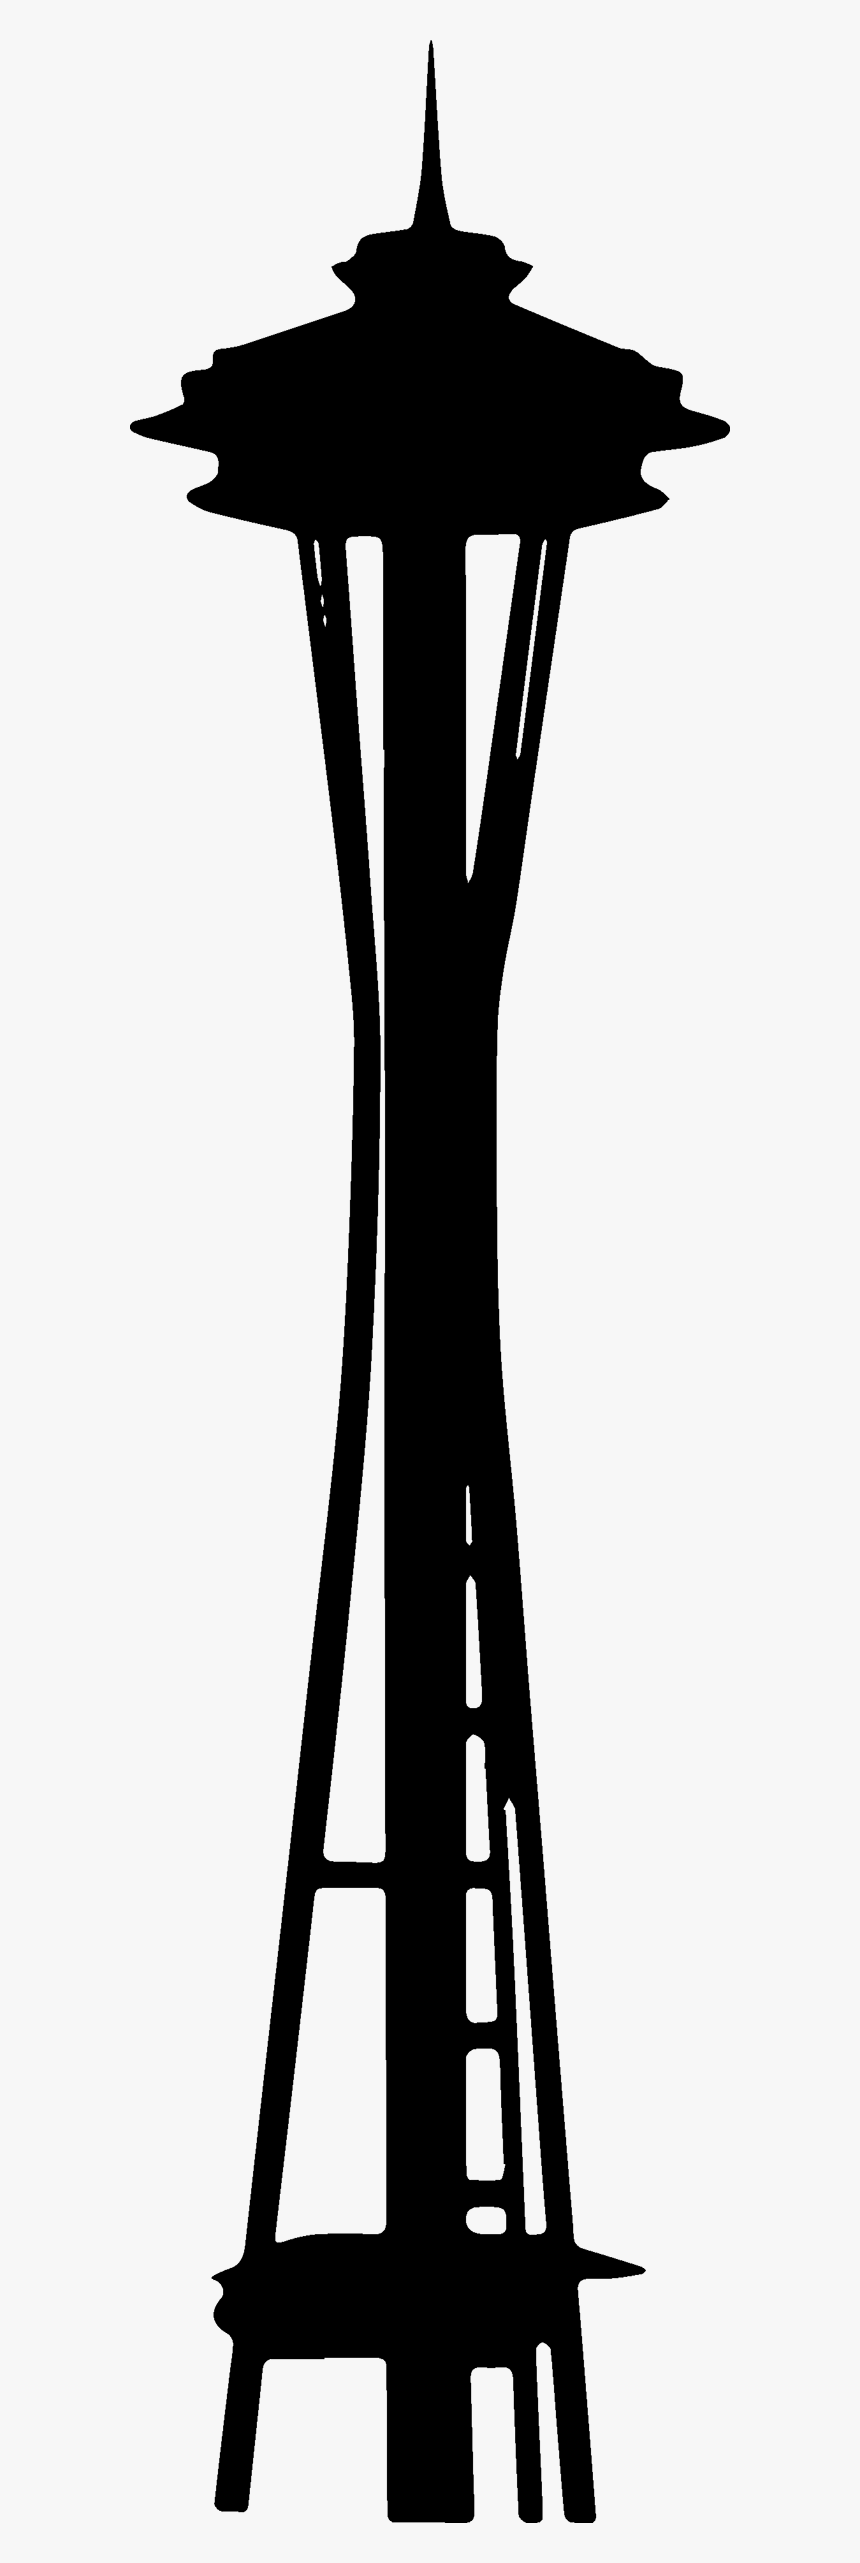 Seattle Space Needle Silhouette - Space Needle Silhouette Vector, HD Png Download, Free Download